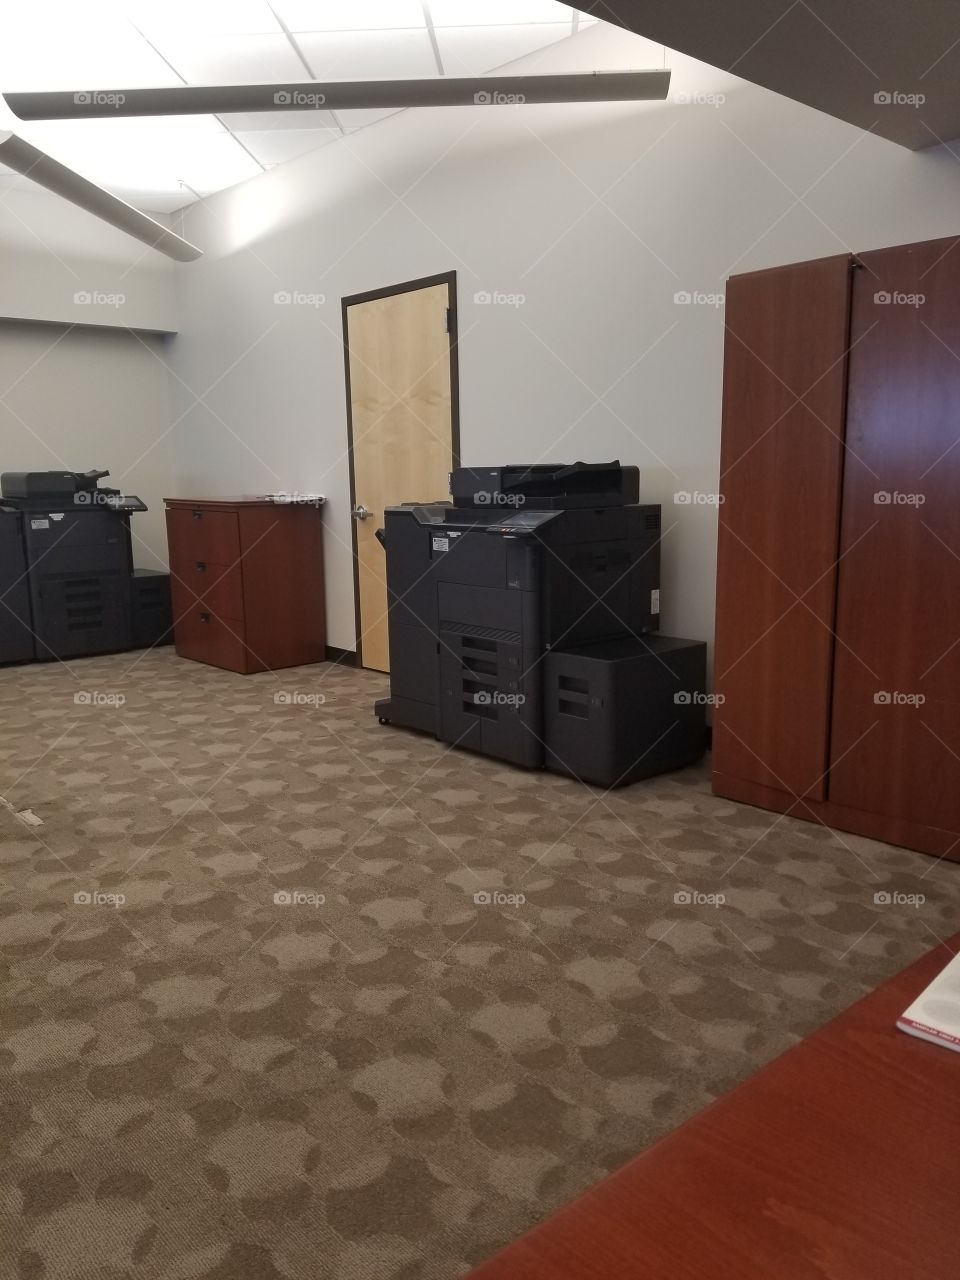 copy machines in office